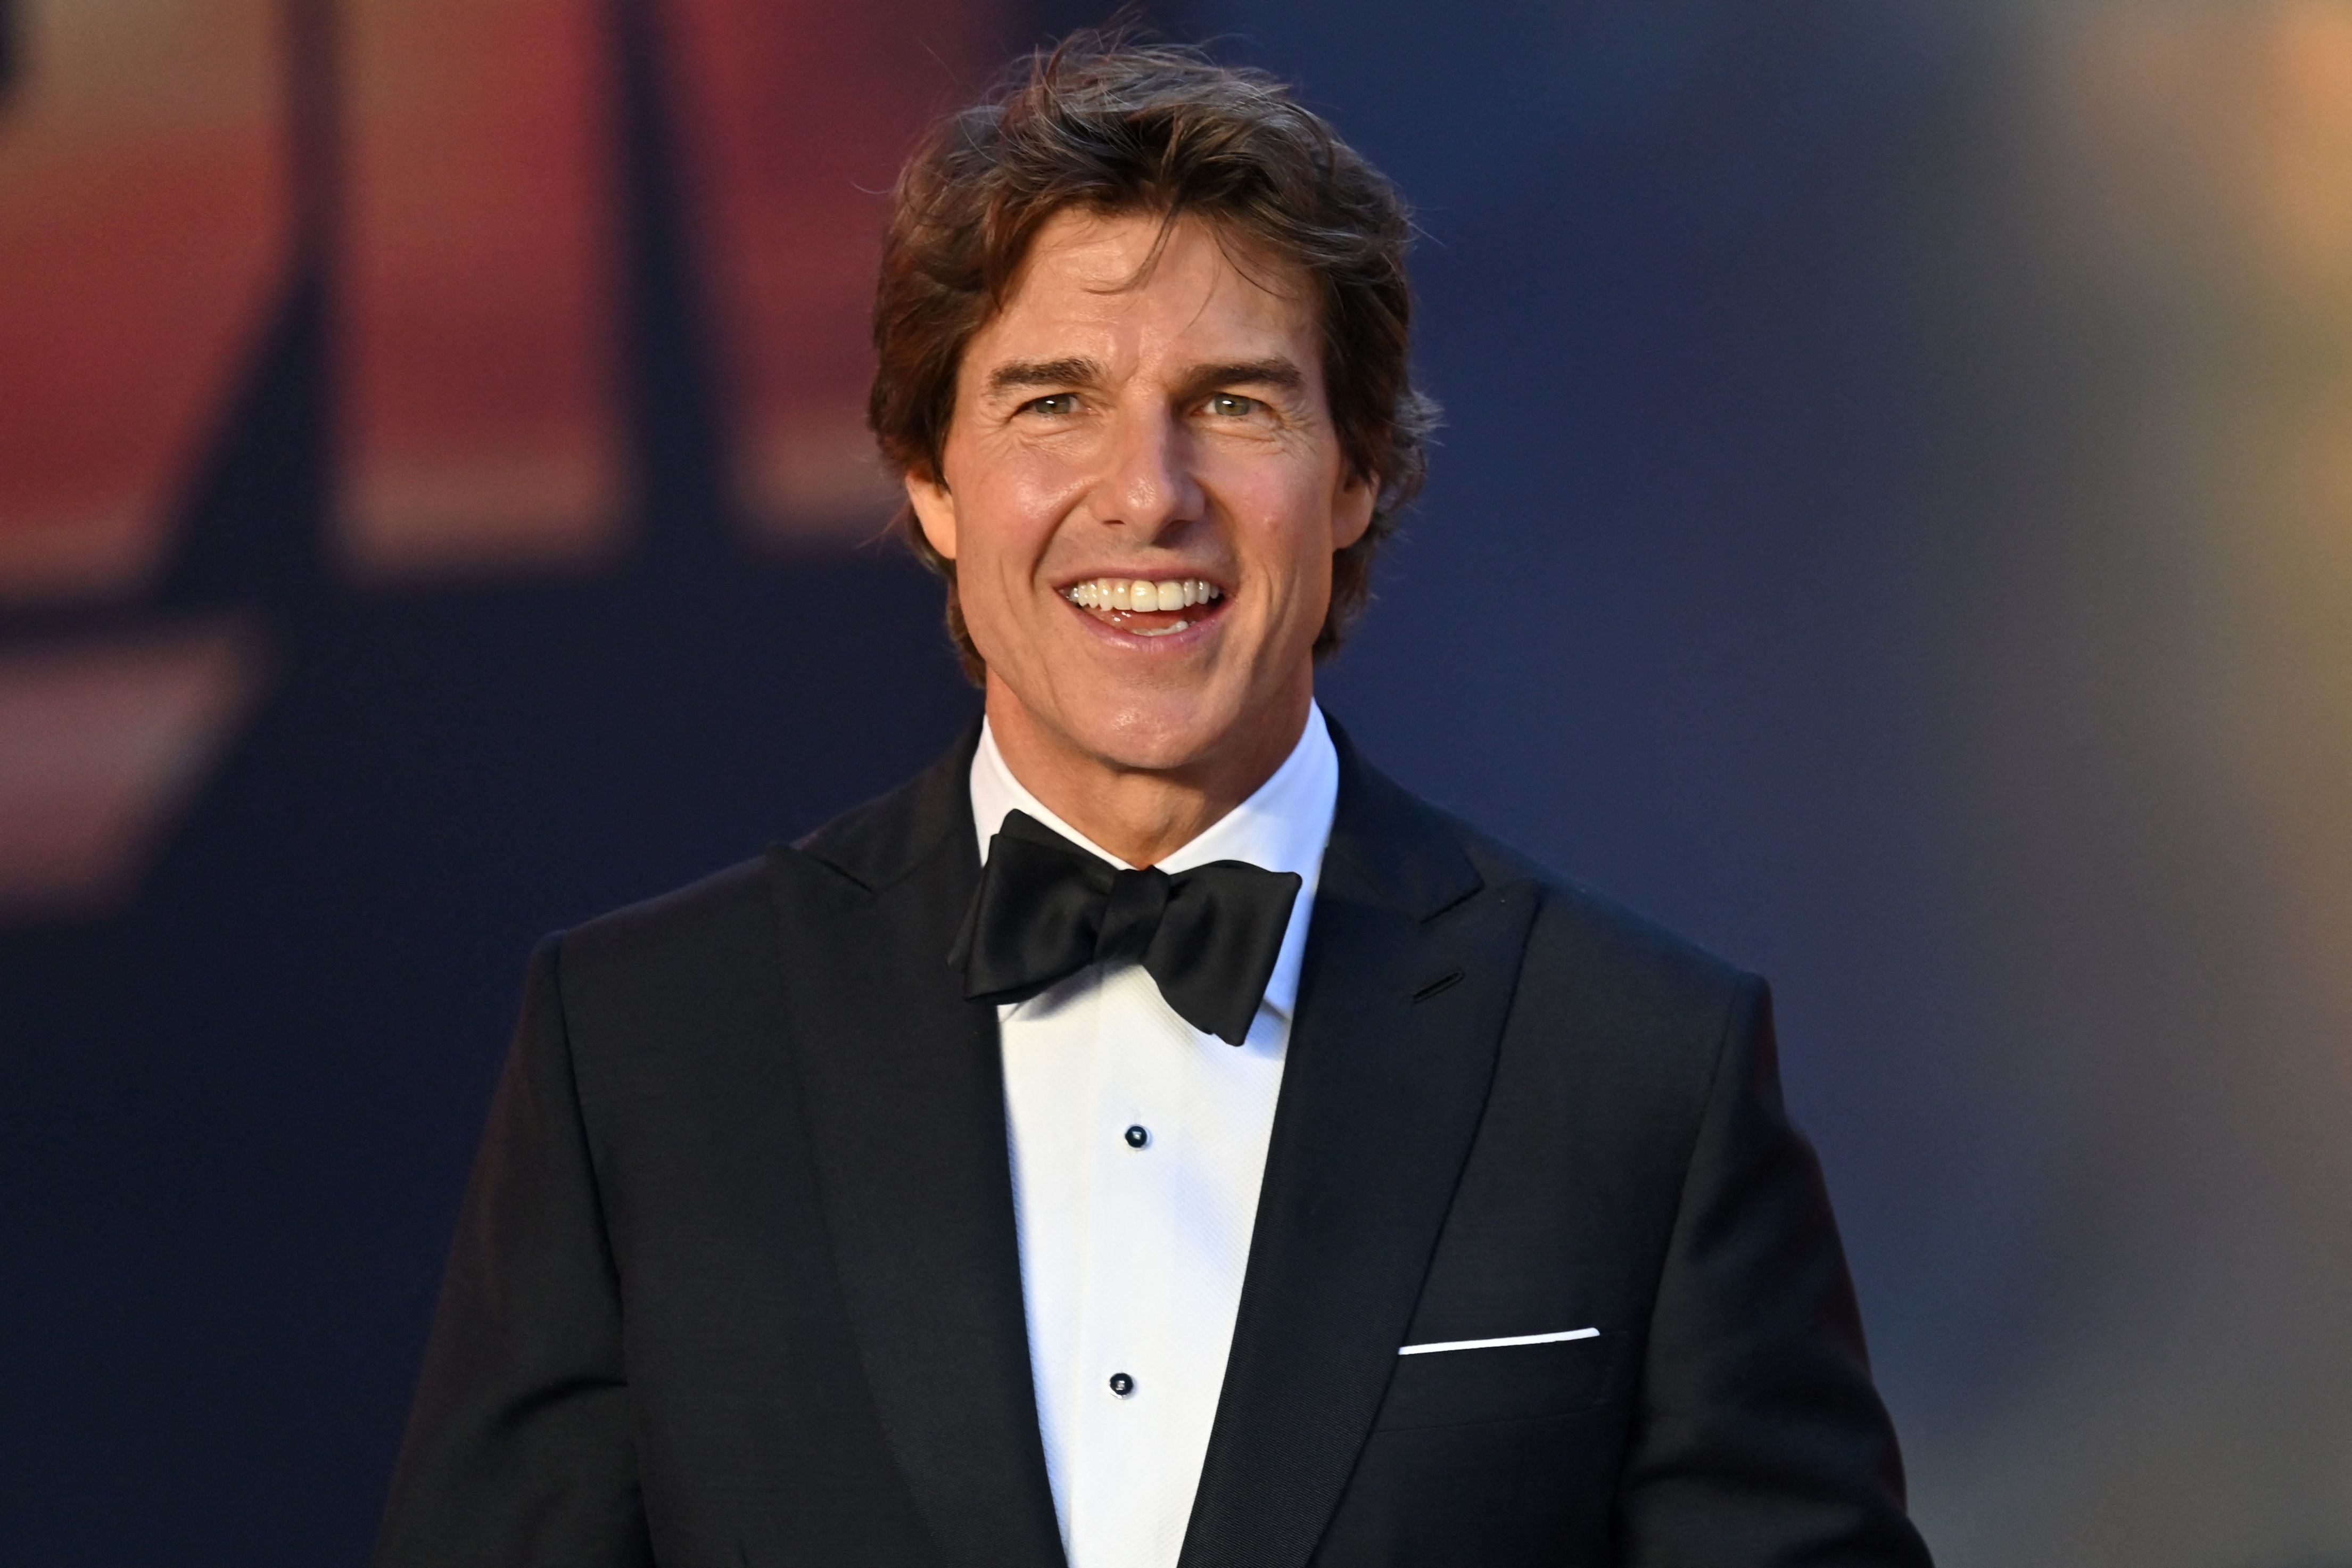 File. Tom Cruise poses upon arrival for the UK premiere of the film Top Gun: Maverick in London, on 19 May 2022